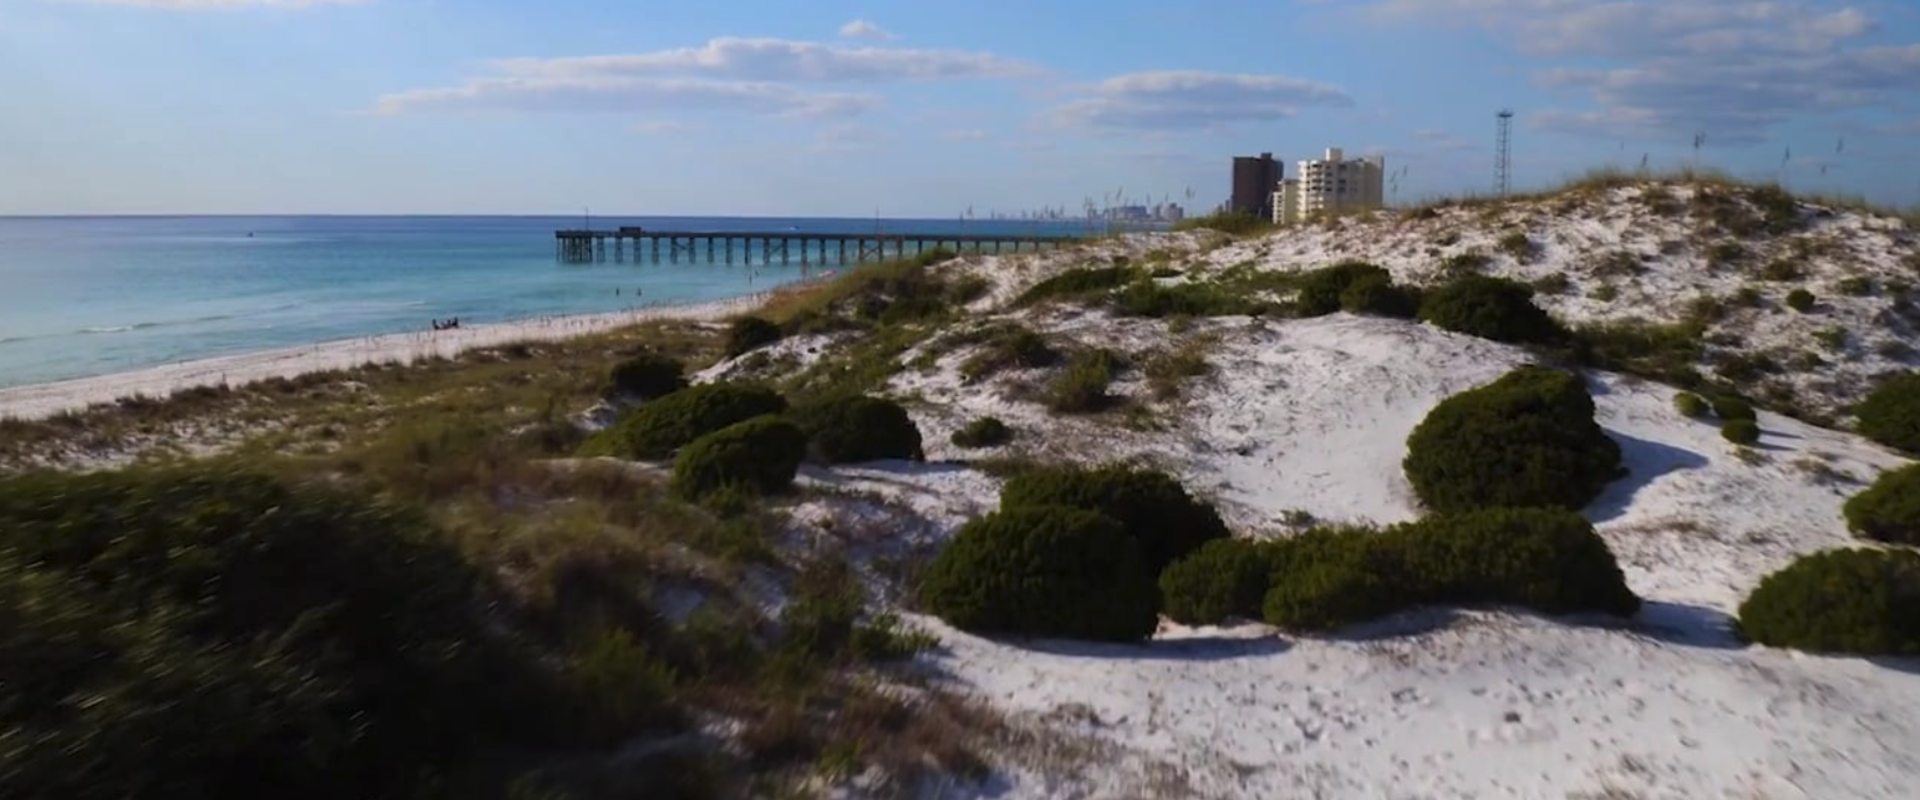 Panama City Beach Find Hotels Restaurants Things To Do